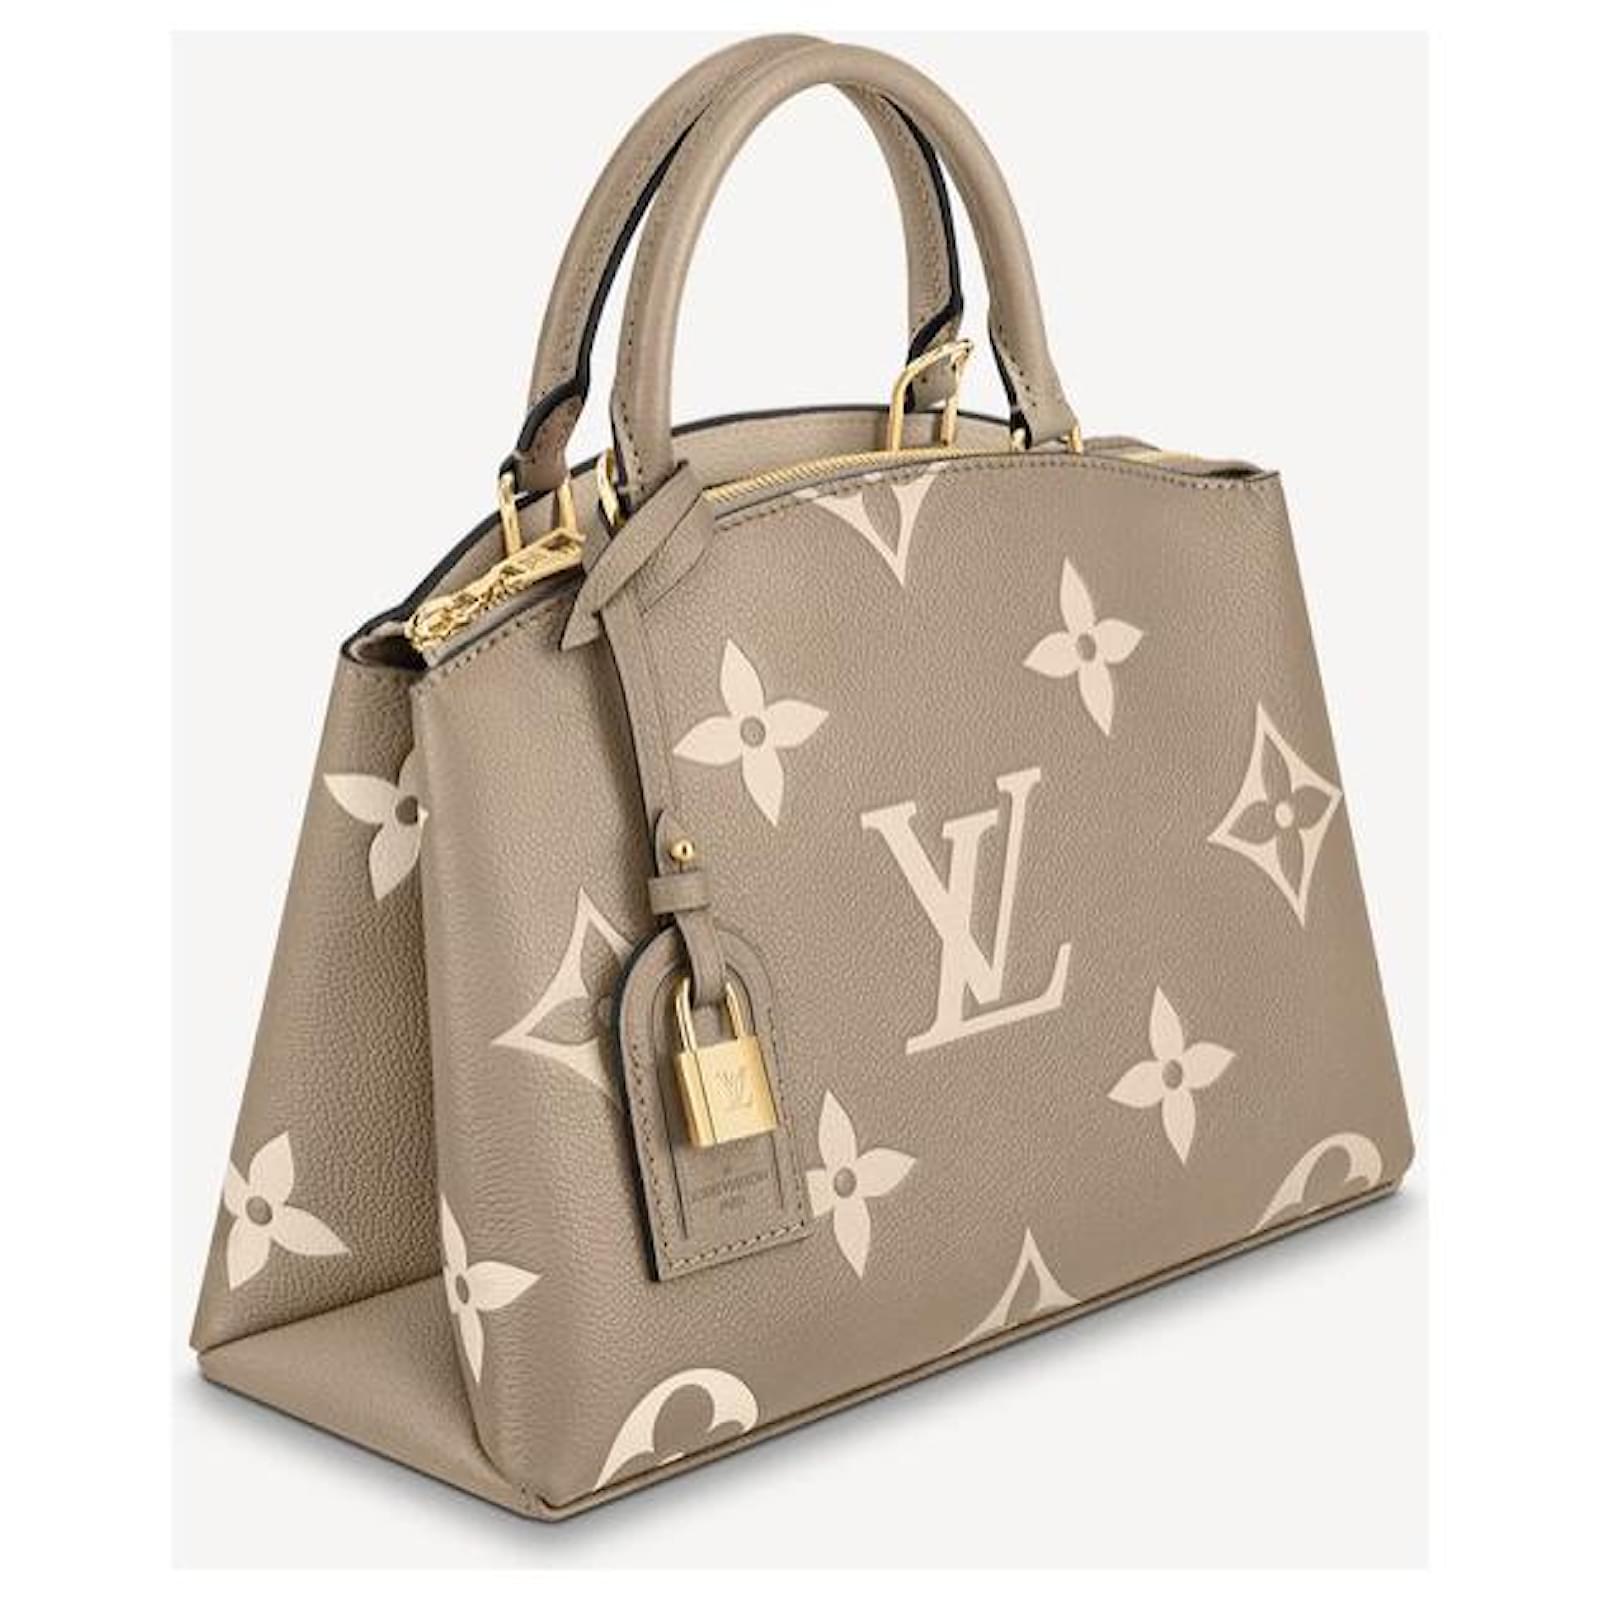 LOUIS VUITTON PETIT PALAIS REVEAL  HANDBAGS I HAVEN'T USED AT ALL